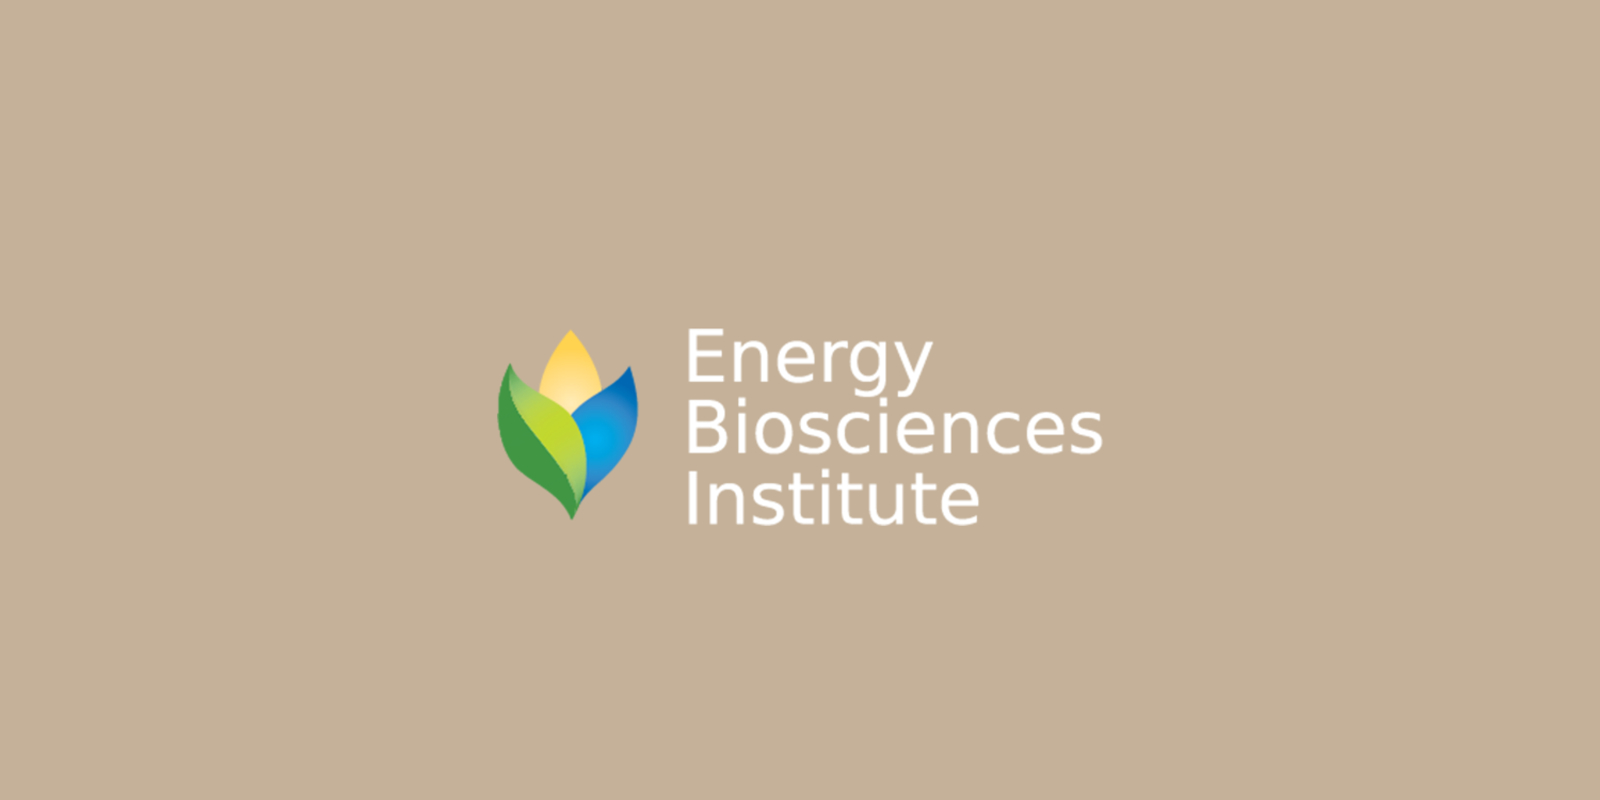 The Energy Biosciences Institute: A Novel Partnership or a Sellout?